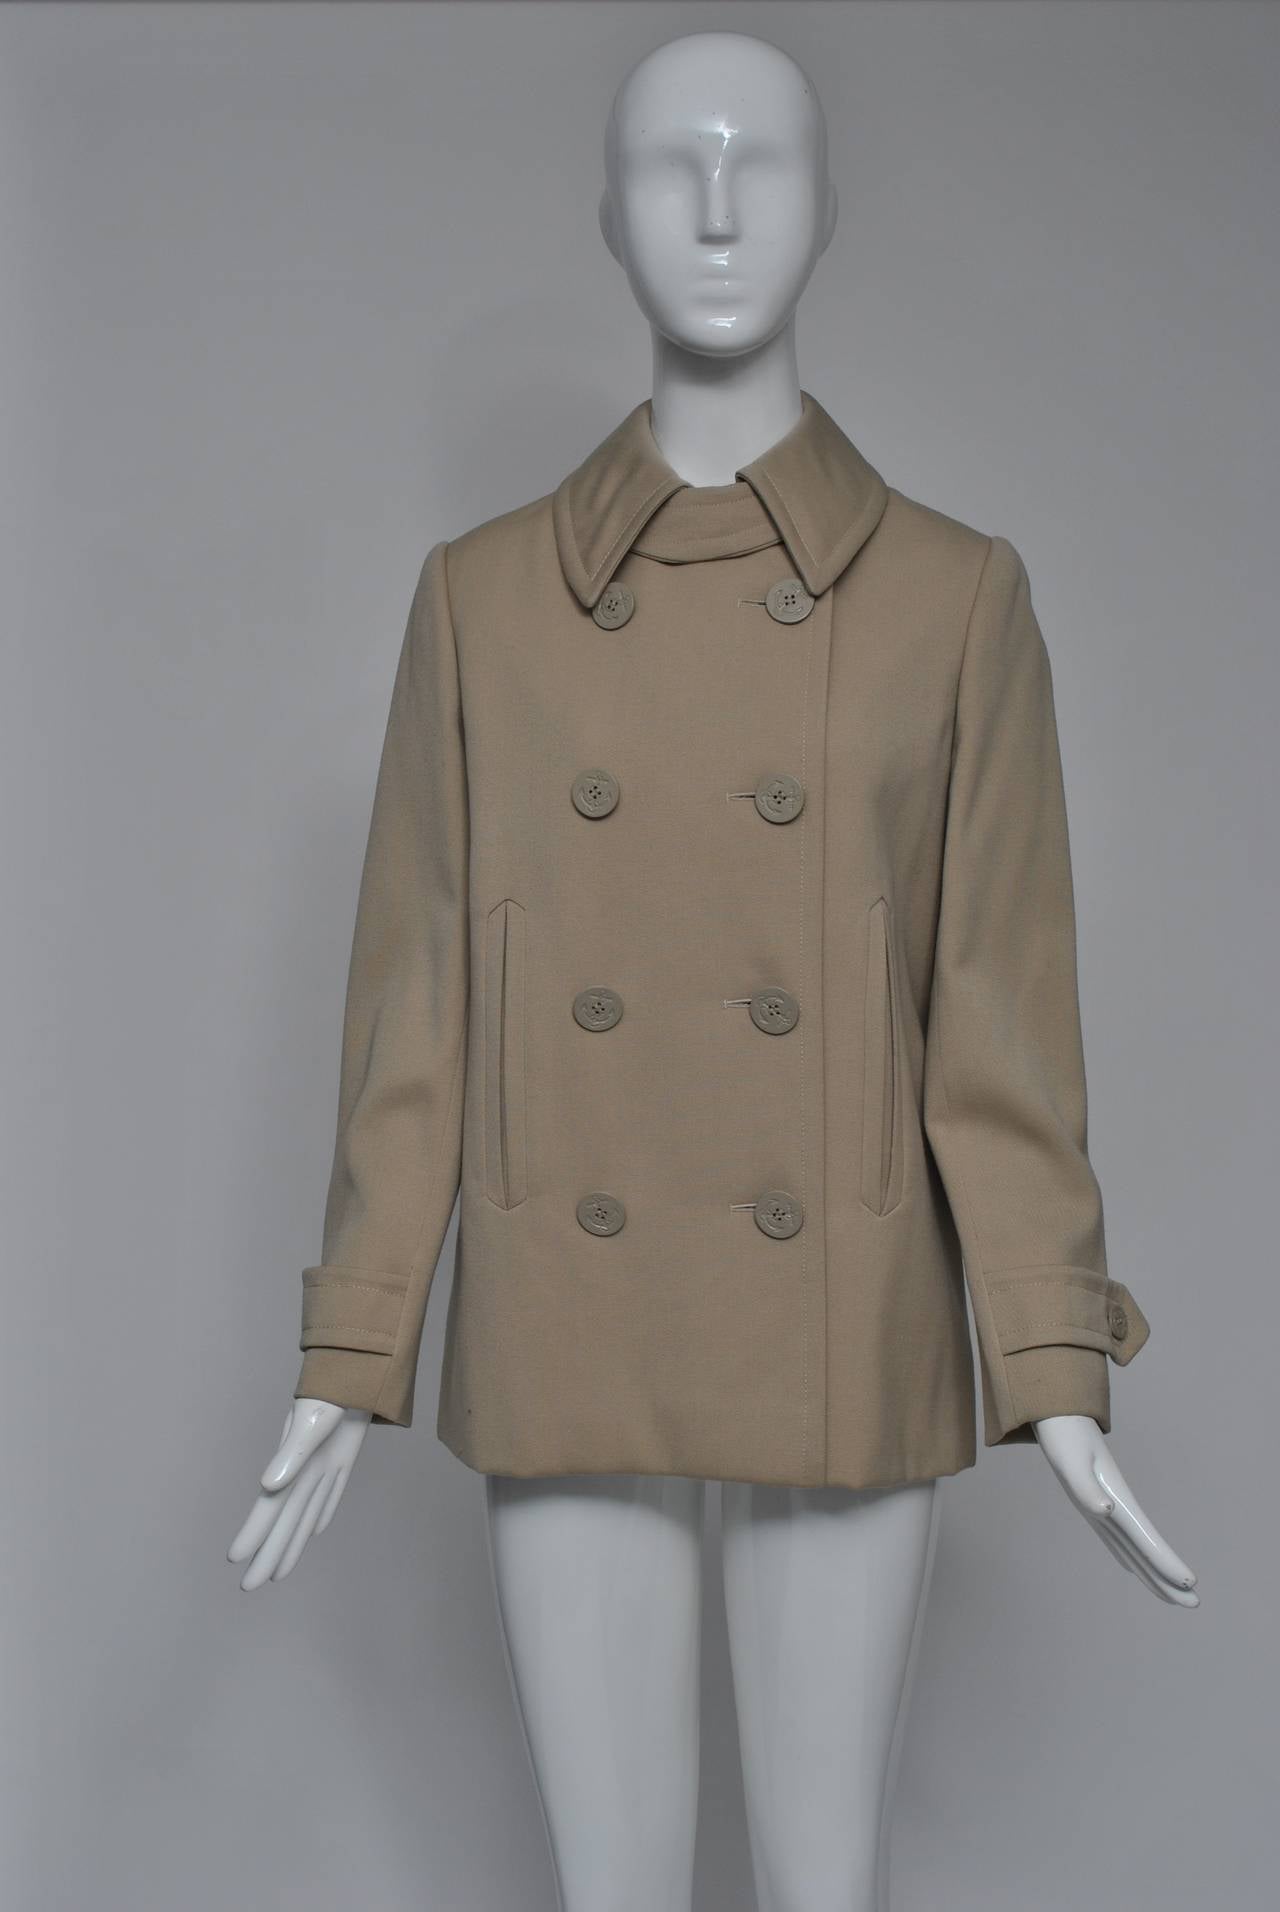 Bill Blass 1970s Pea Coat In Excellent Condition For Sale In Alford, MA